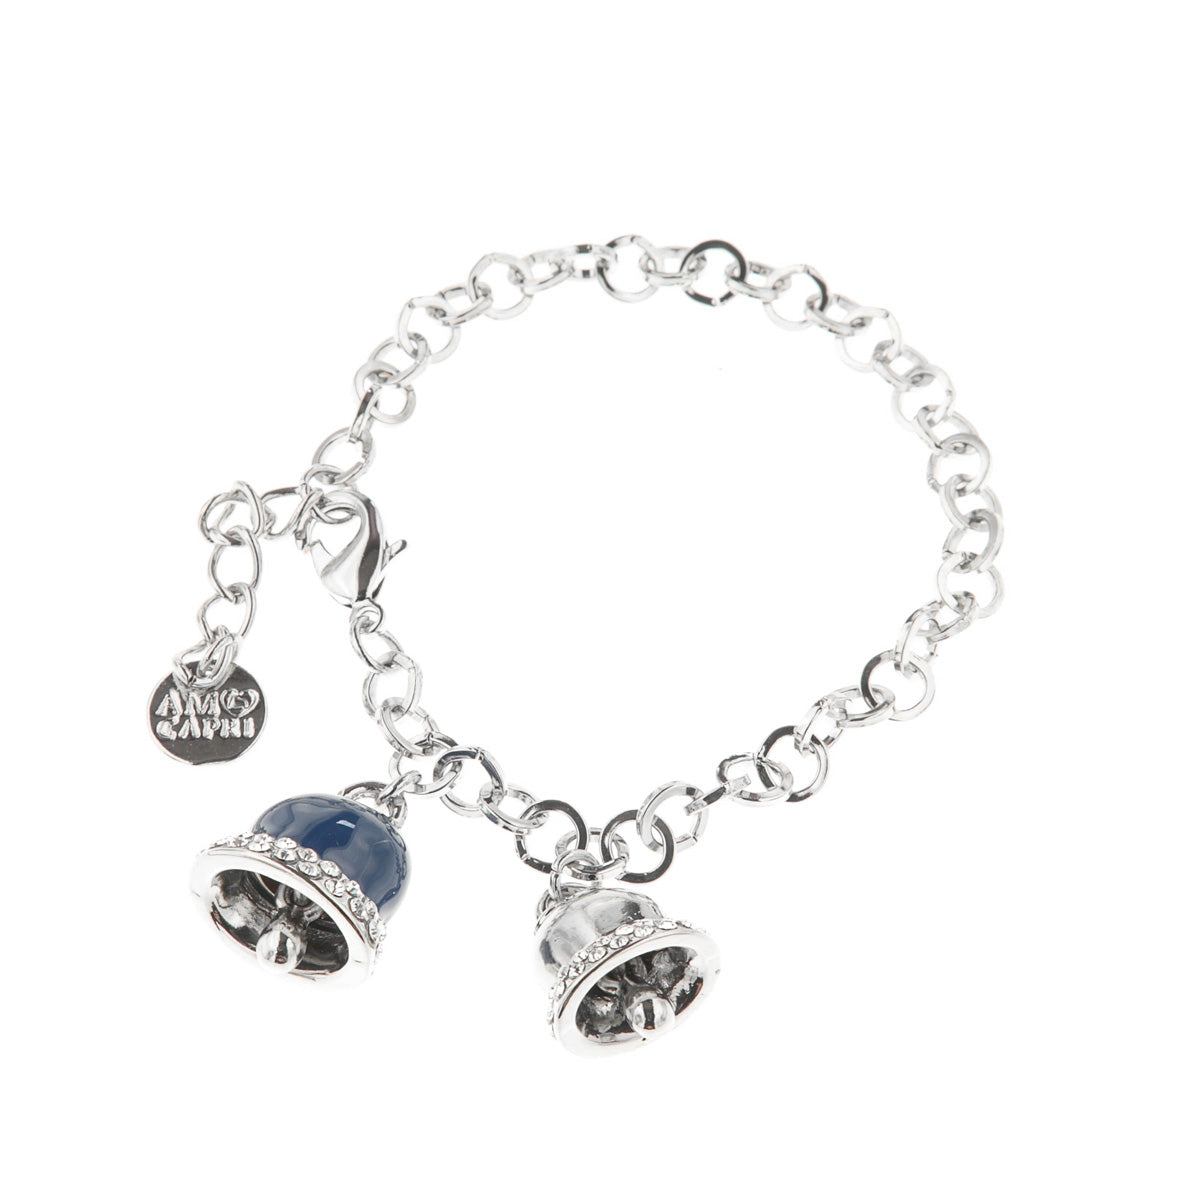 Metal bracelet with blue enamel charming bell embellished with white crystals